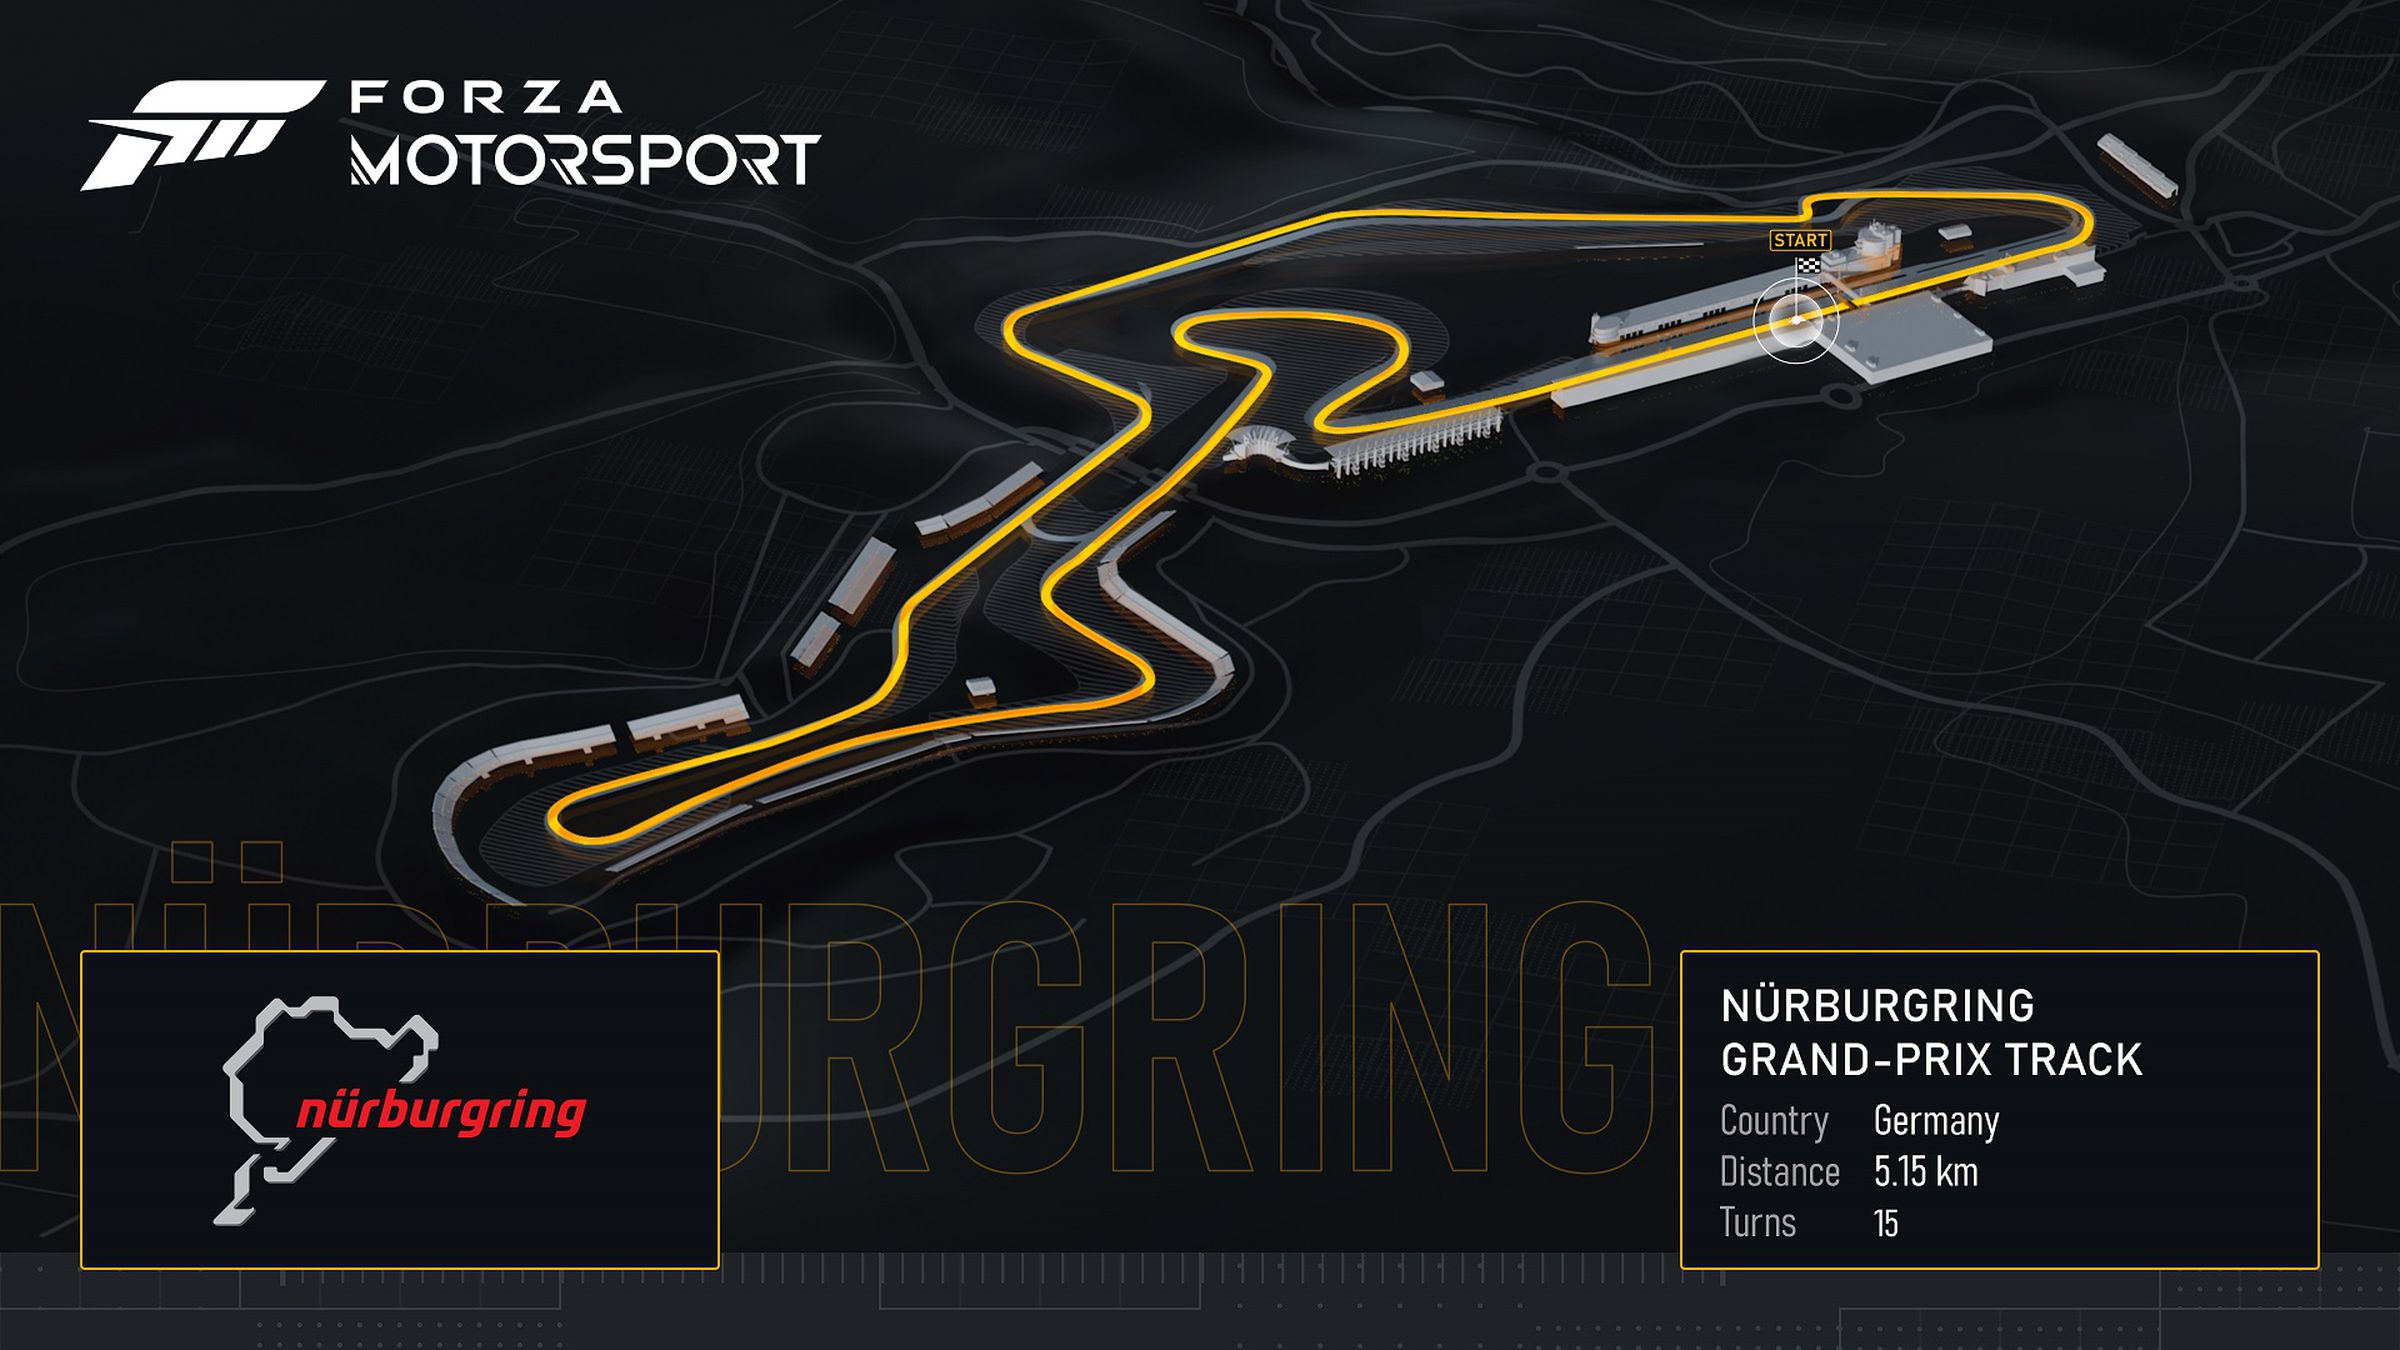 The Nürburgring GP circuit will be available at launch.